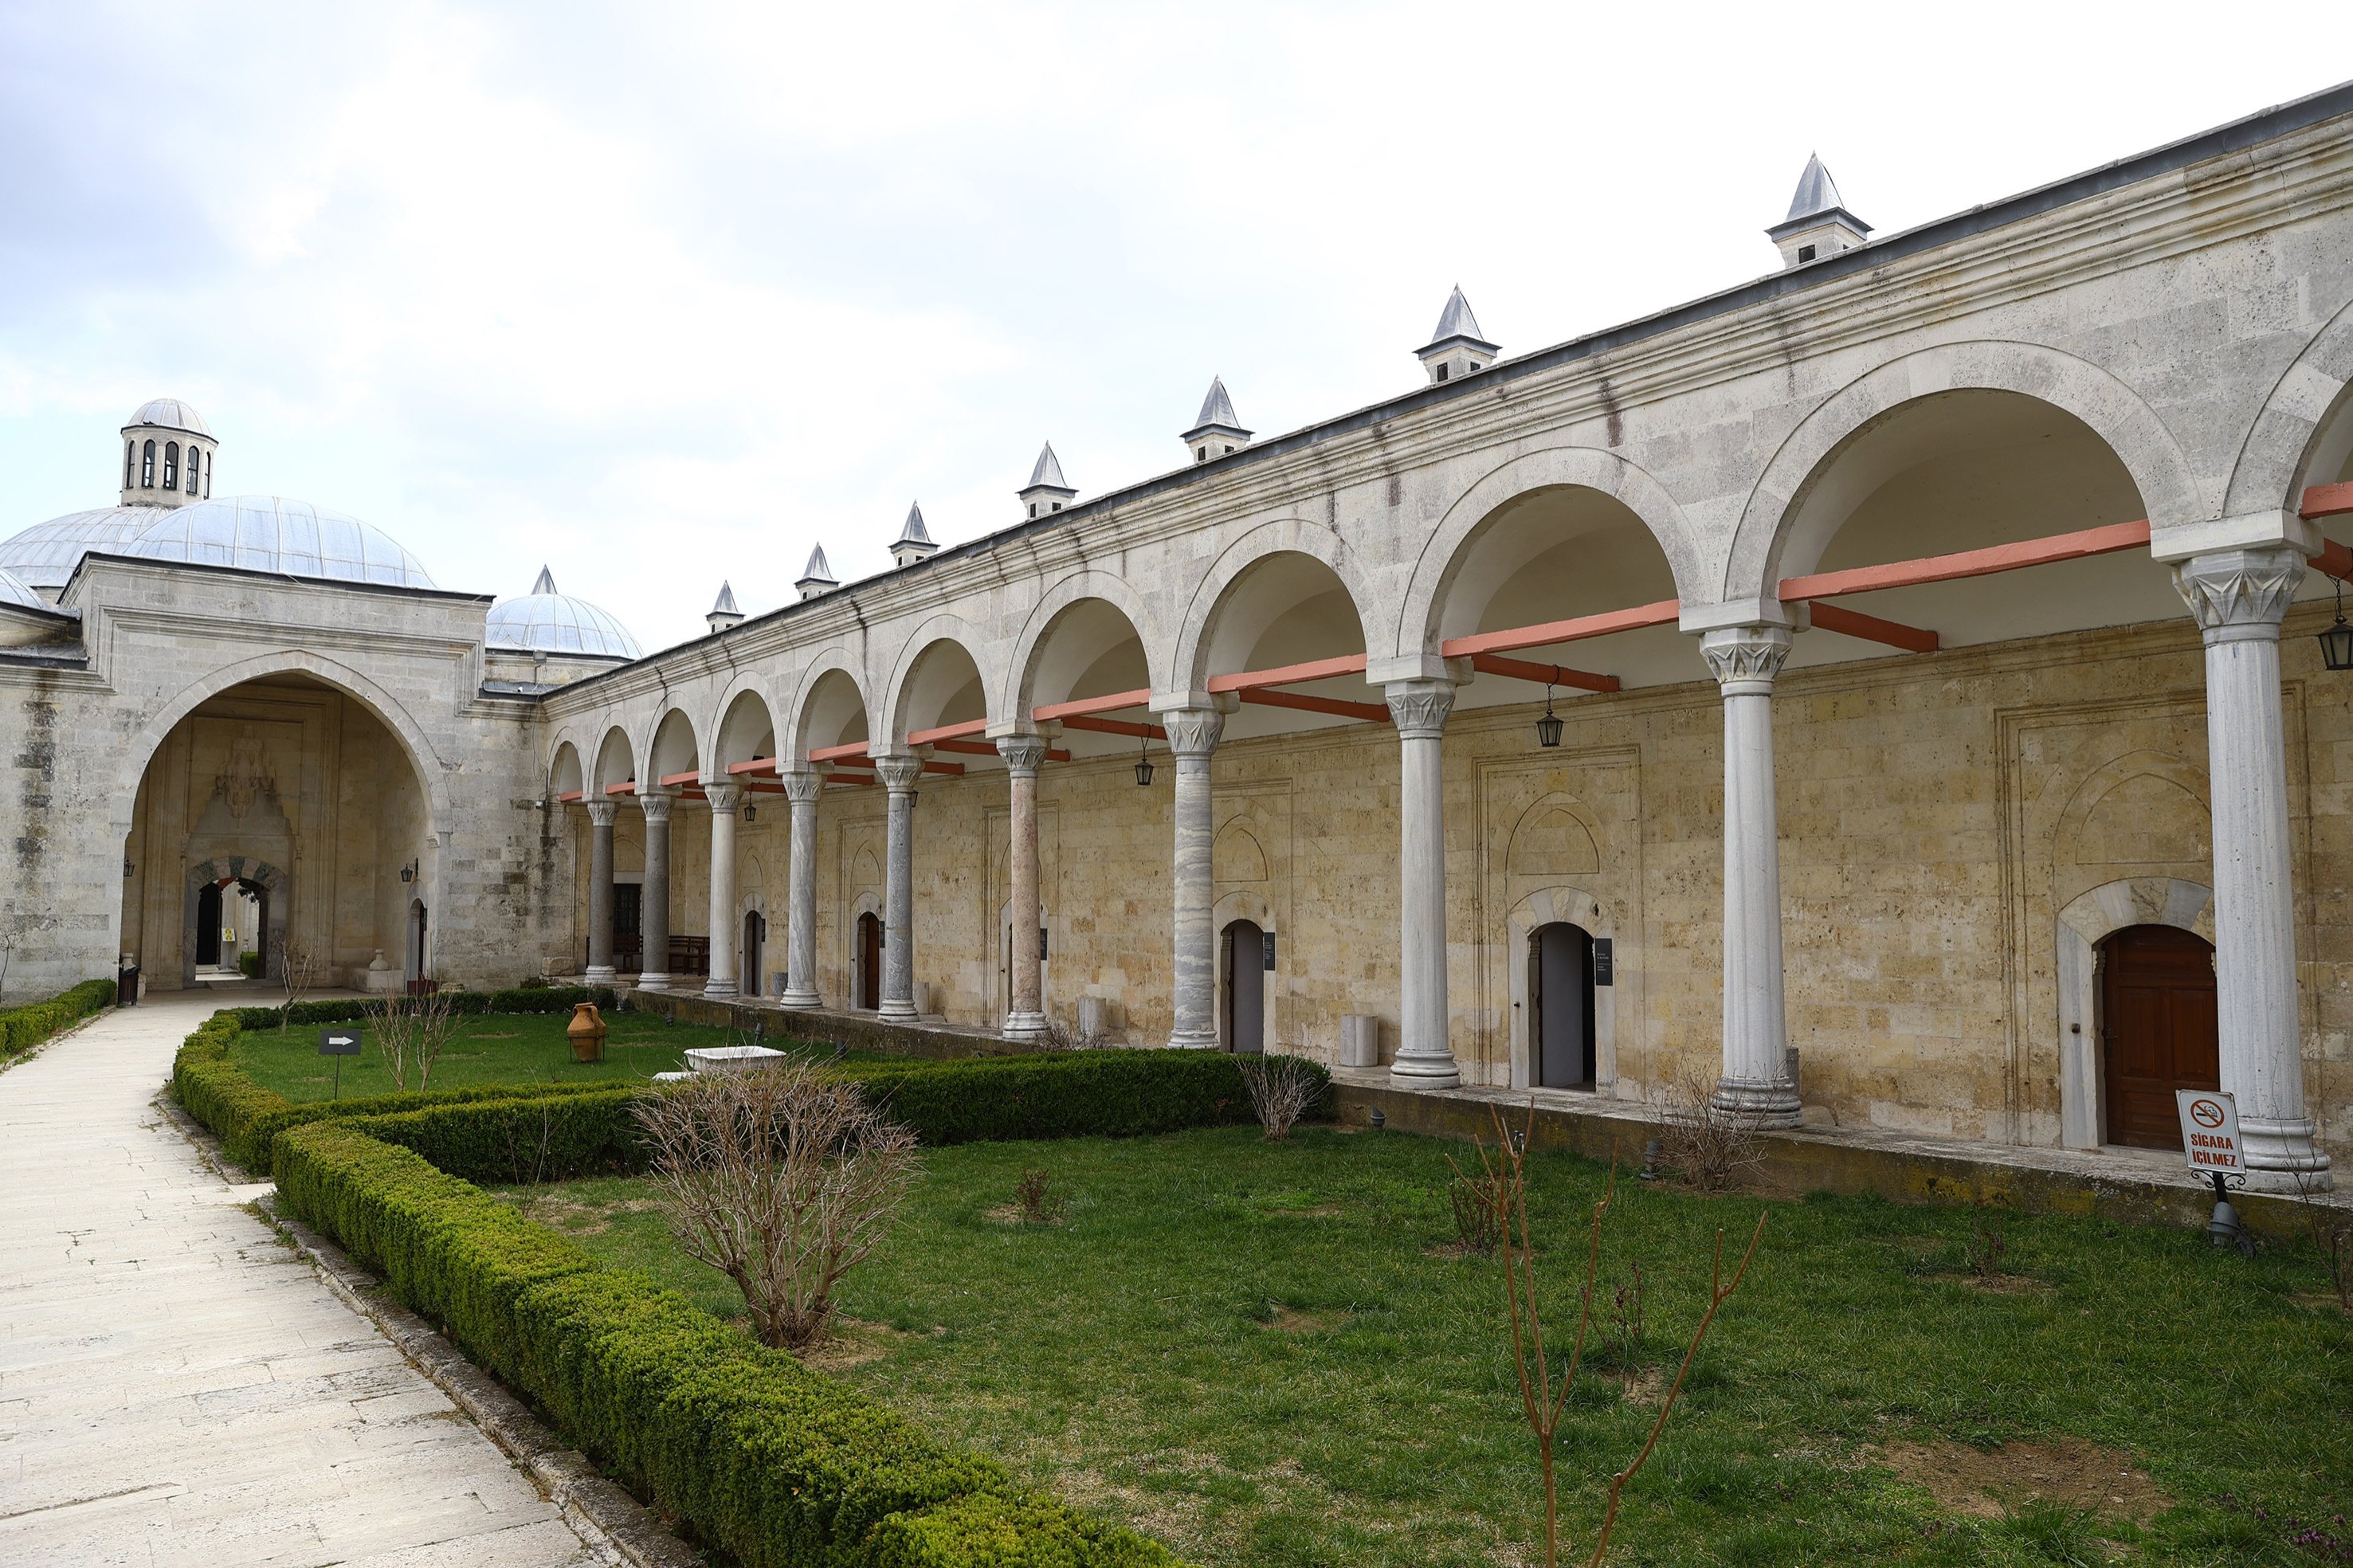 The courtyard and entrances to historical education rooms of the Sultan Bayezid II Complex can be seen in Edirne, Turkey, May 17, 2021. (AA Photo)